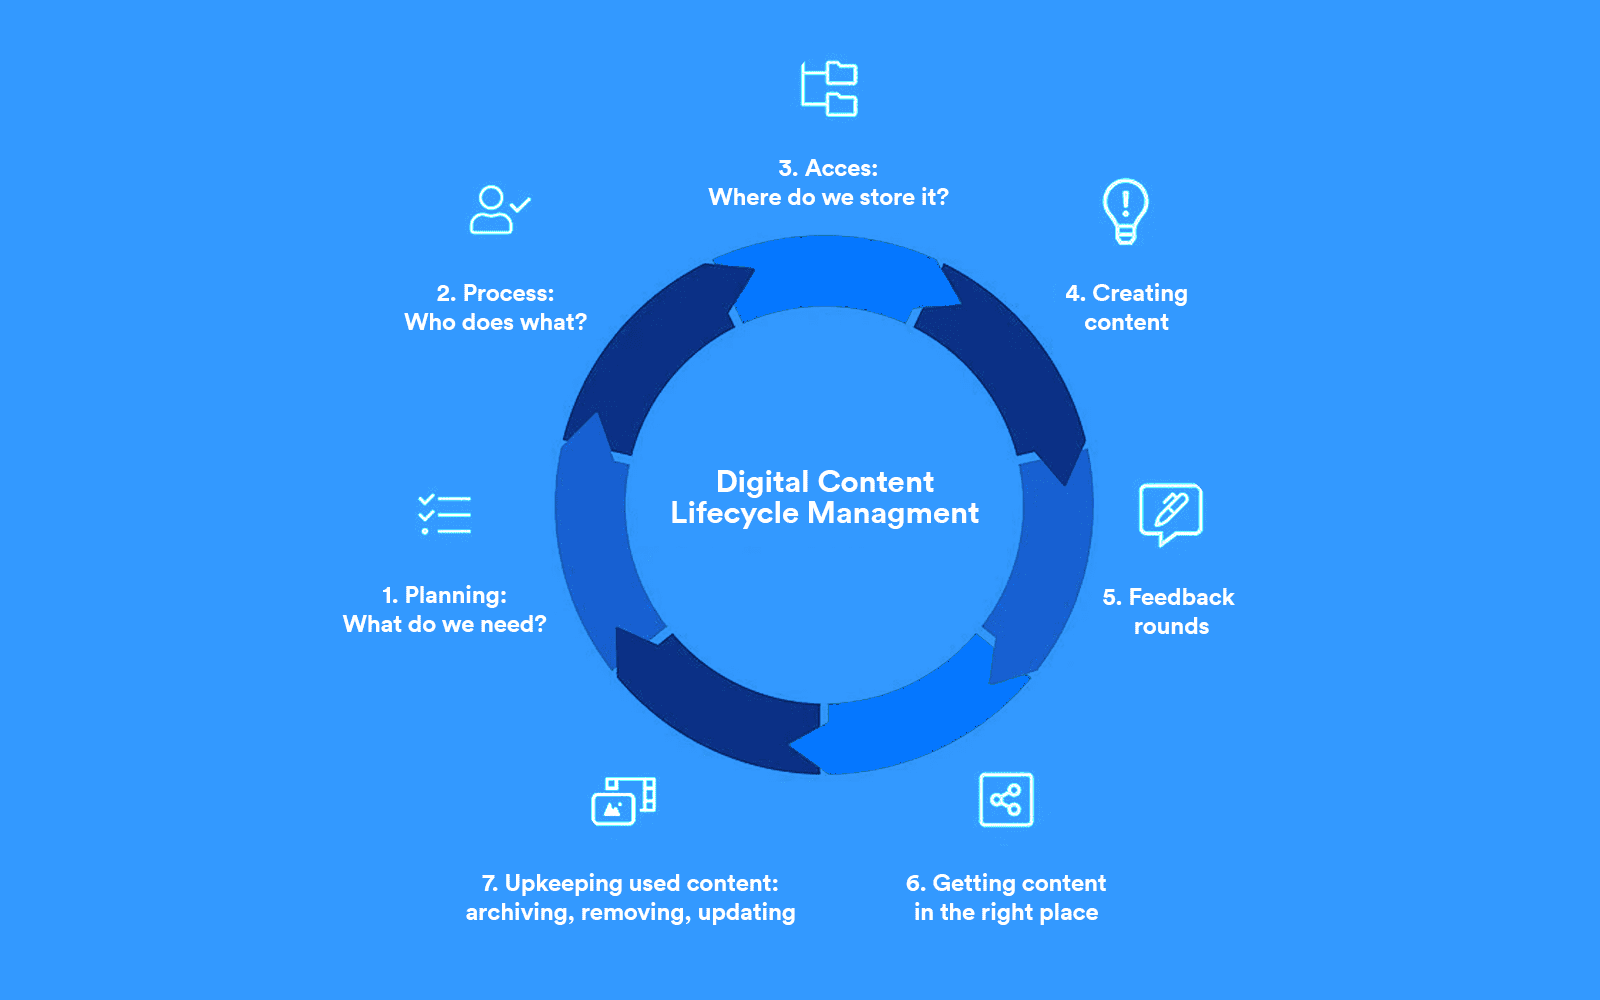 The 7 Stages of Digital Content Lifecycle Management:
1. Planning: What do we need?
2. Process: Who does what?
3. Access: Where do we store it?
4. Creating content
5. Feedback rounds
6. Getting content in the right place
7. Upkeeping used content: archiving, removing, updating